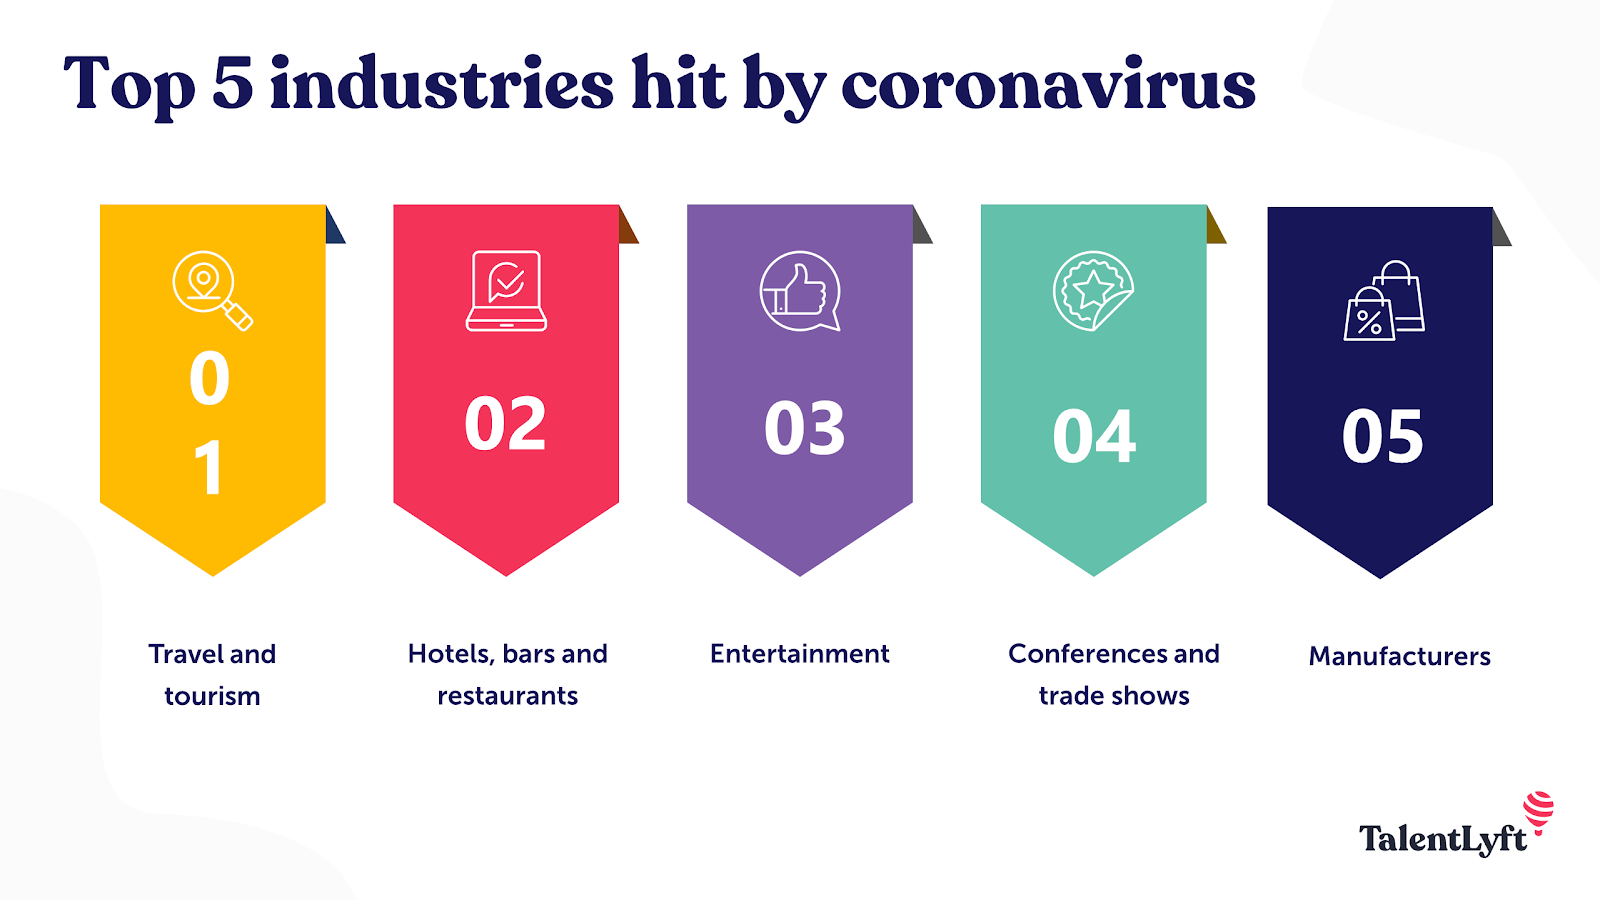 Industries most severely affected by COVID-19